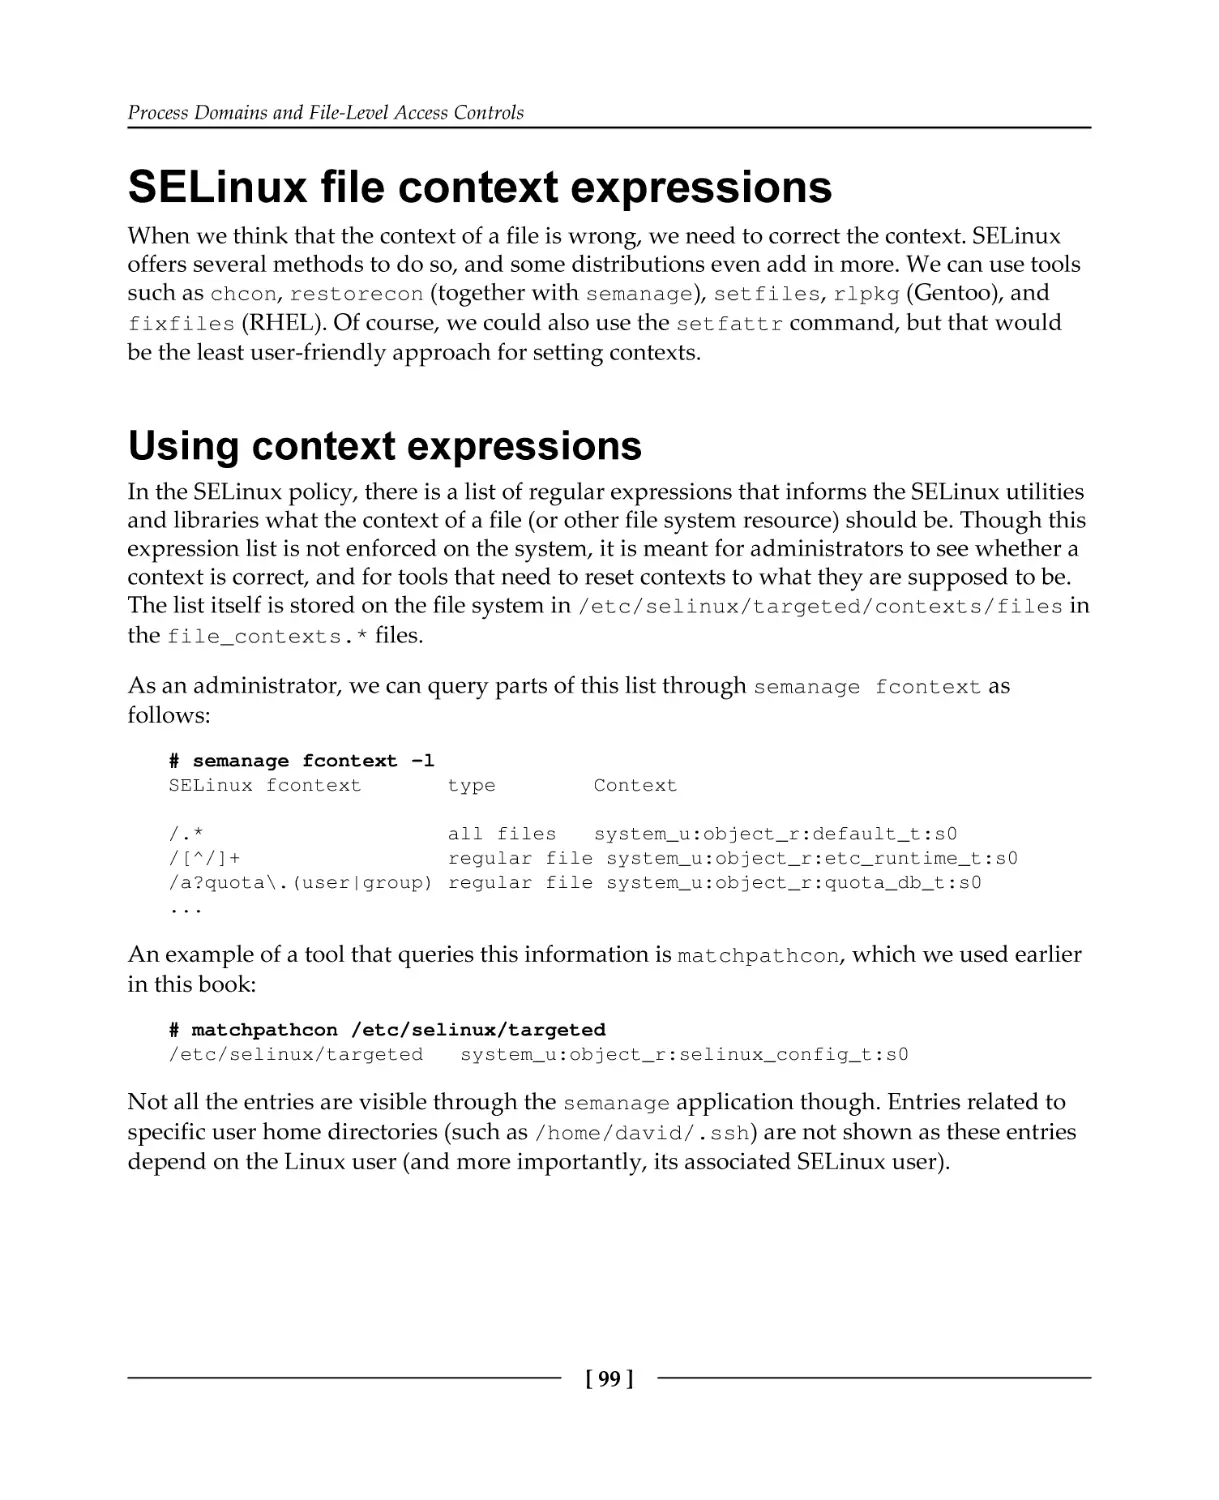 SELinux file context expressions
Using context expressions